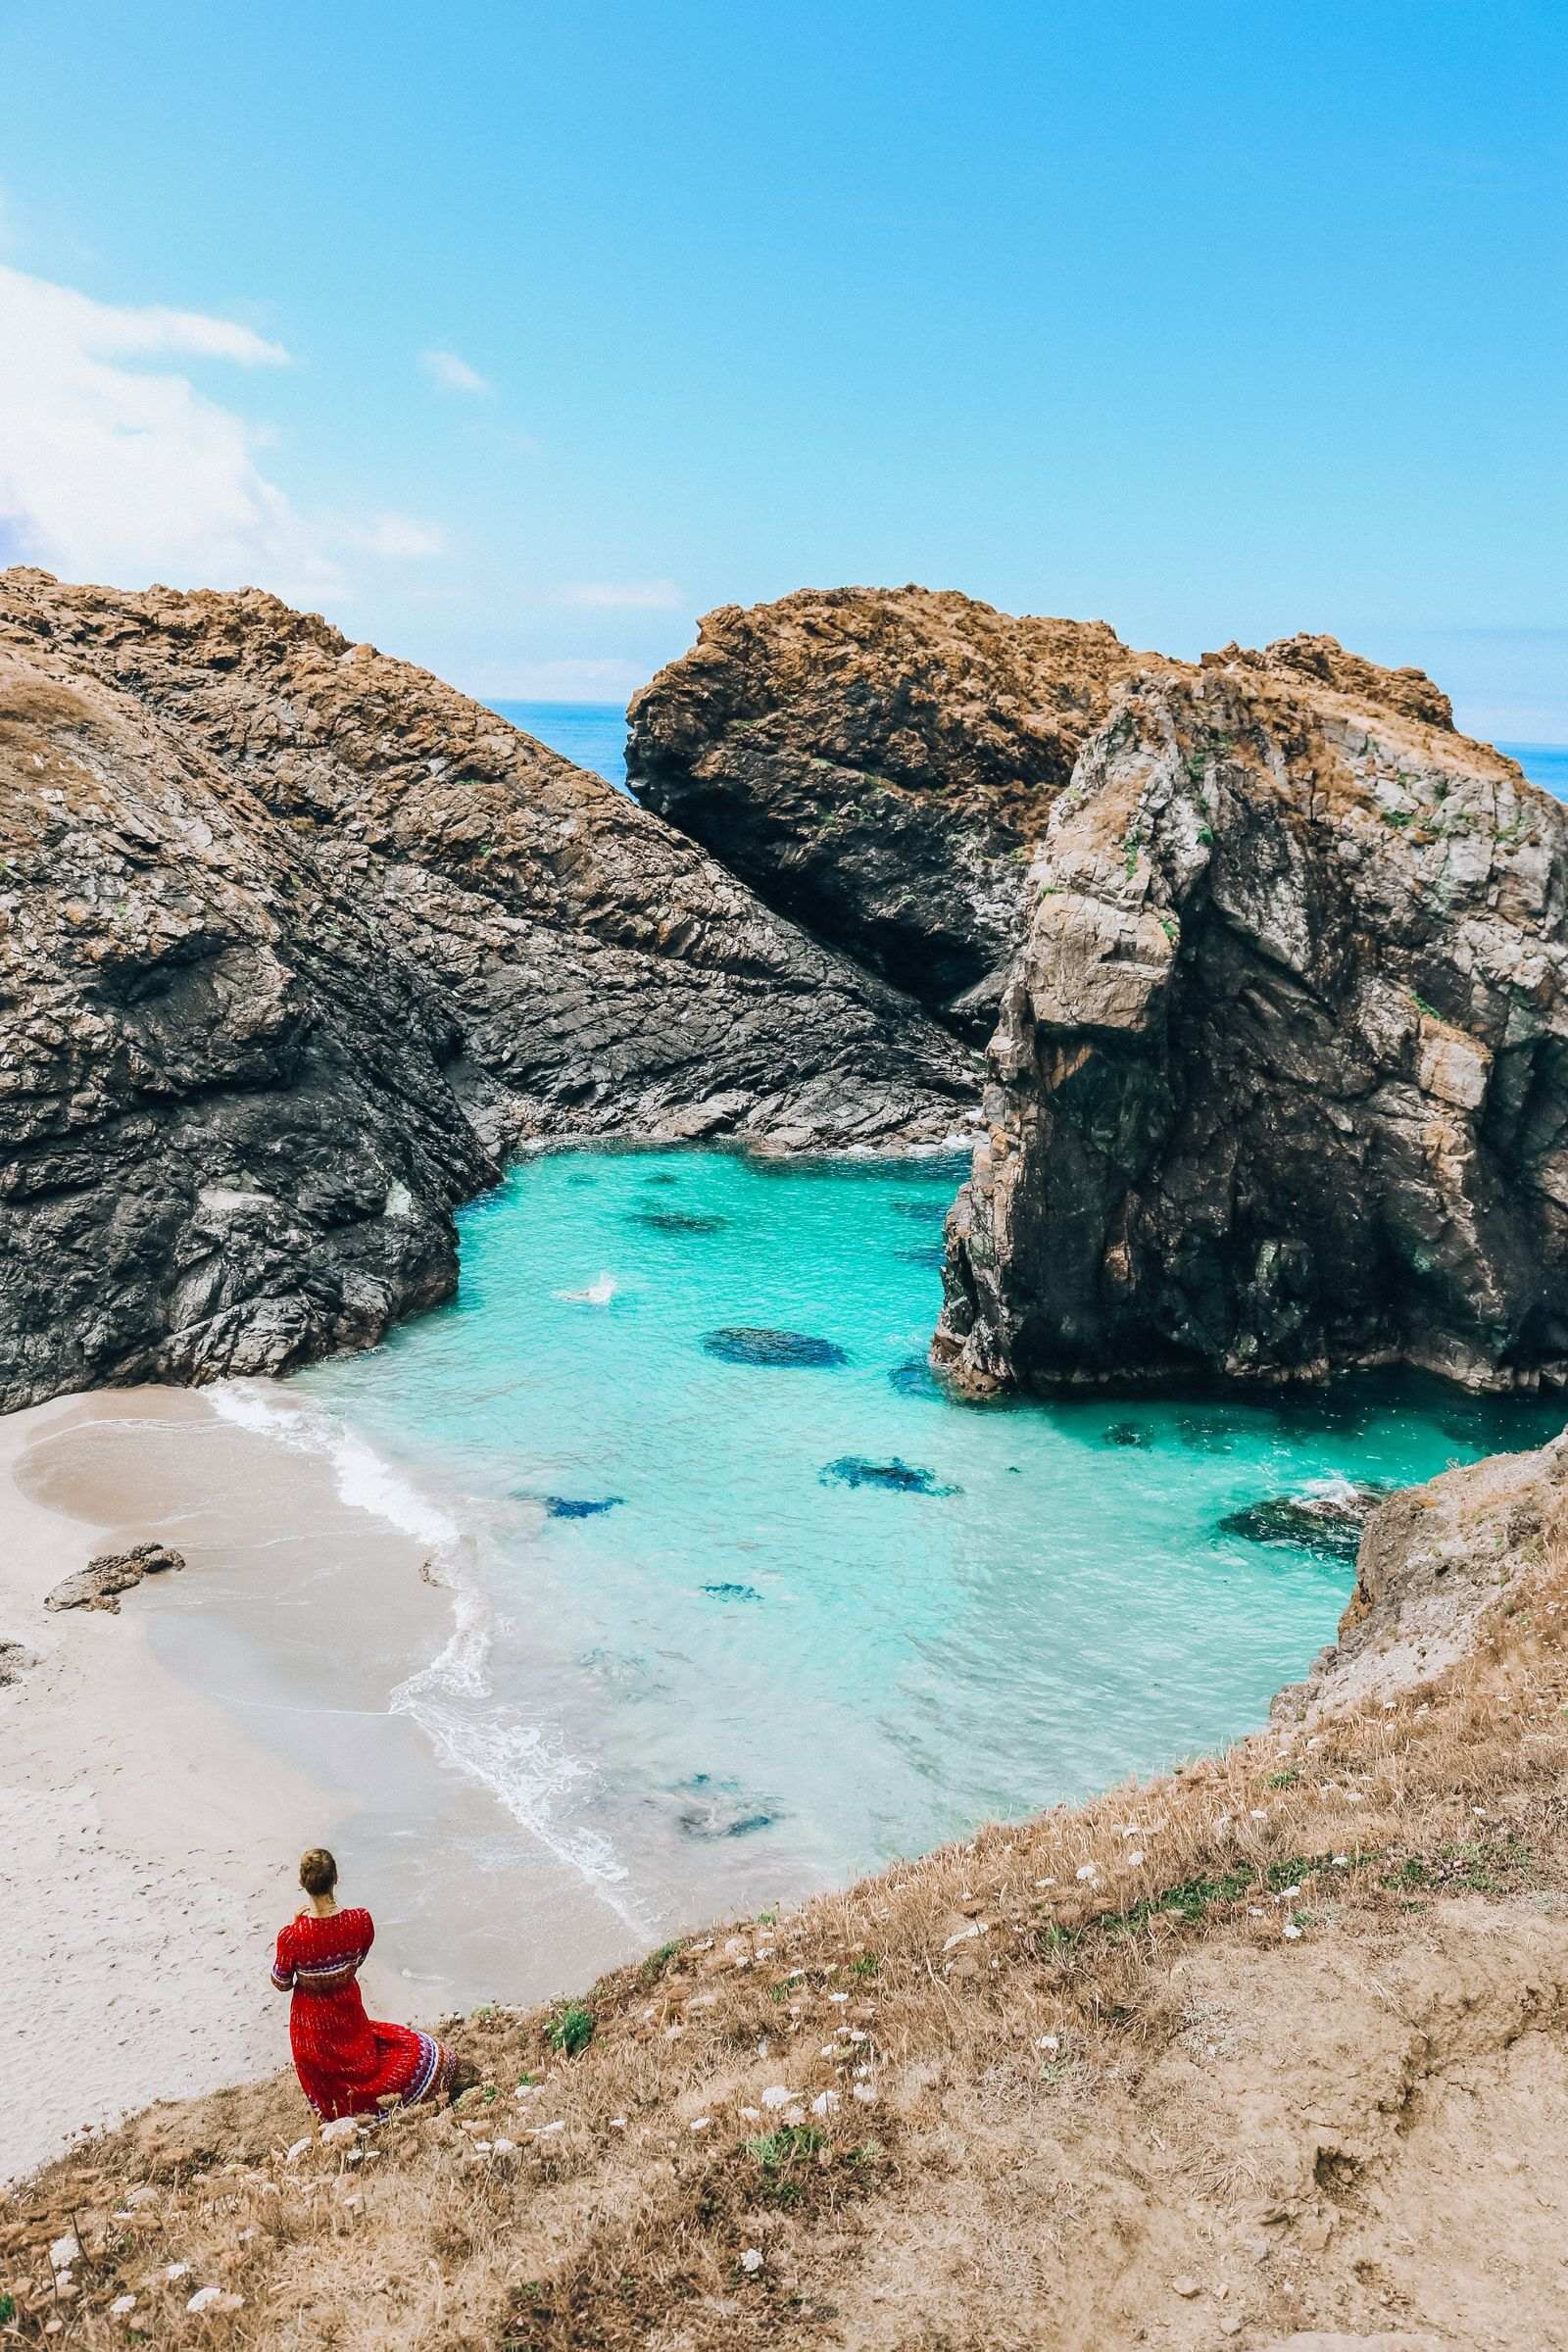 Girl in a red dress standing on a grassy slope with a white sand beach below and turquose blue water lapping at the beach with grey craggy rocks around the cove